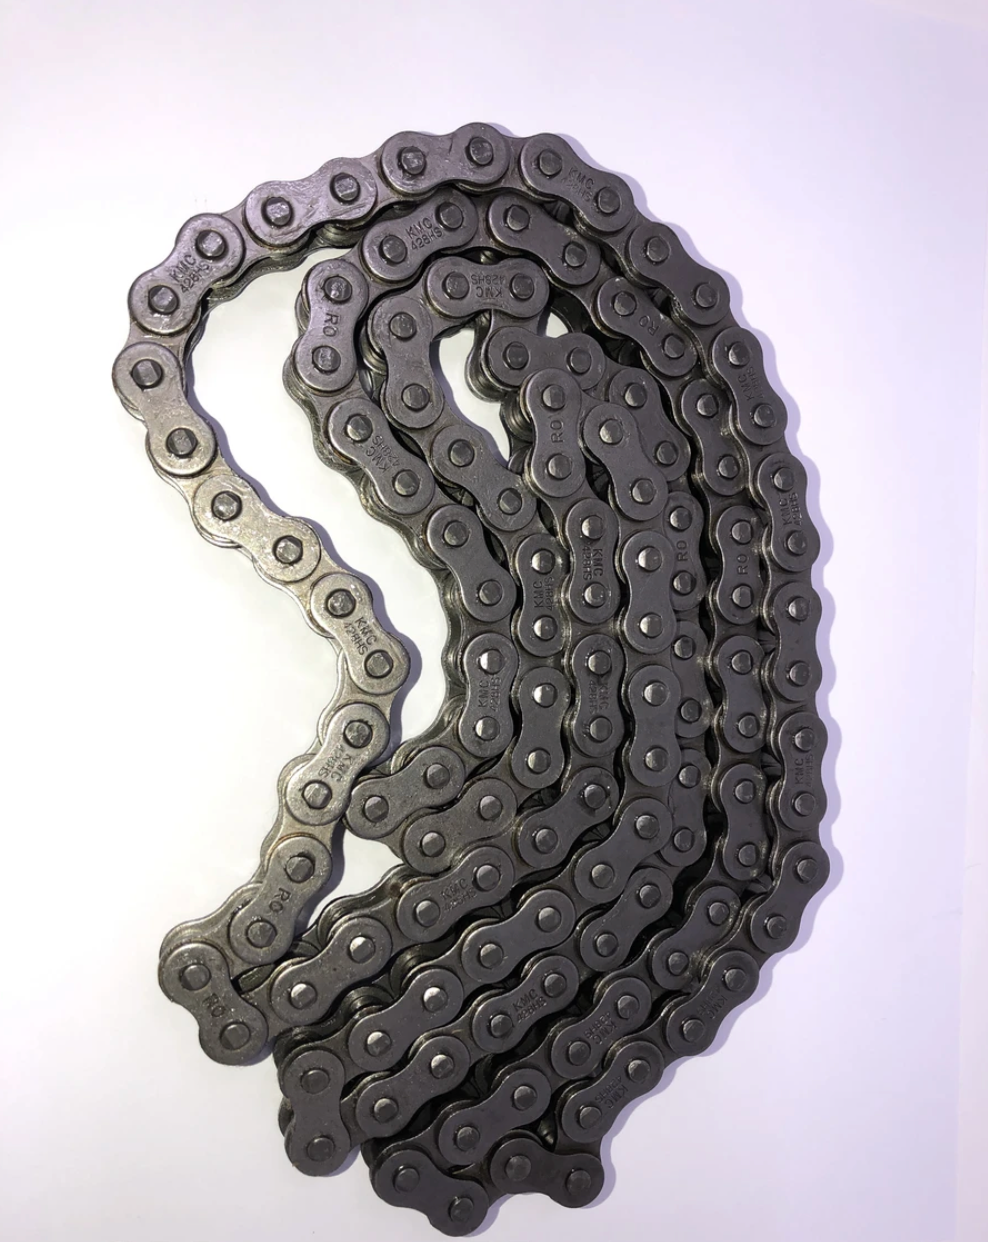 DF250RTS chain for sale. Part # 02040207 chain for X22R 250cc